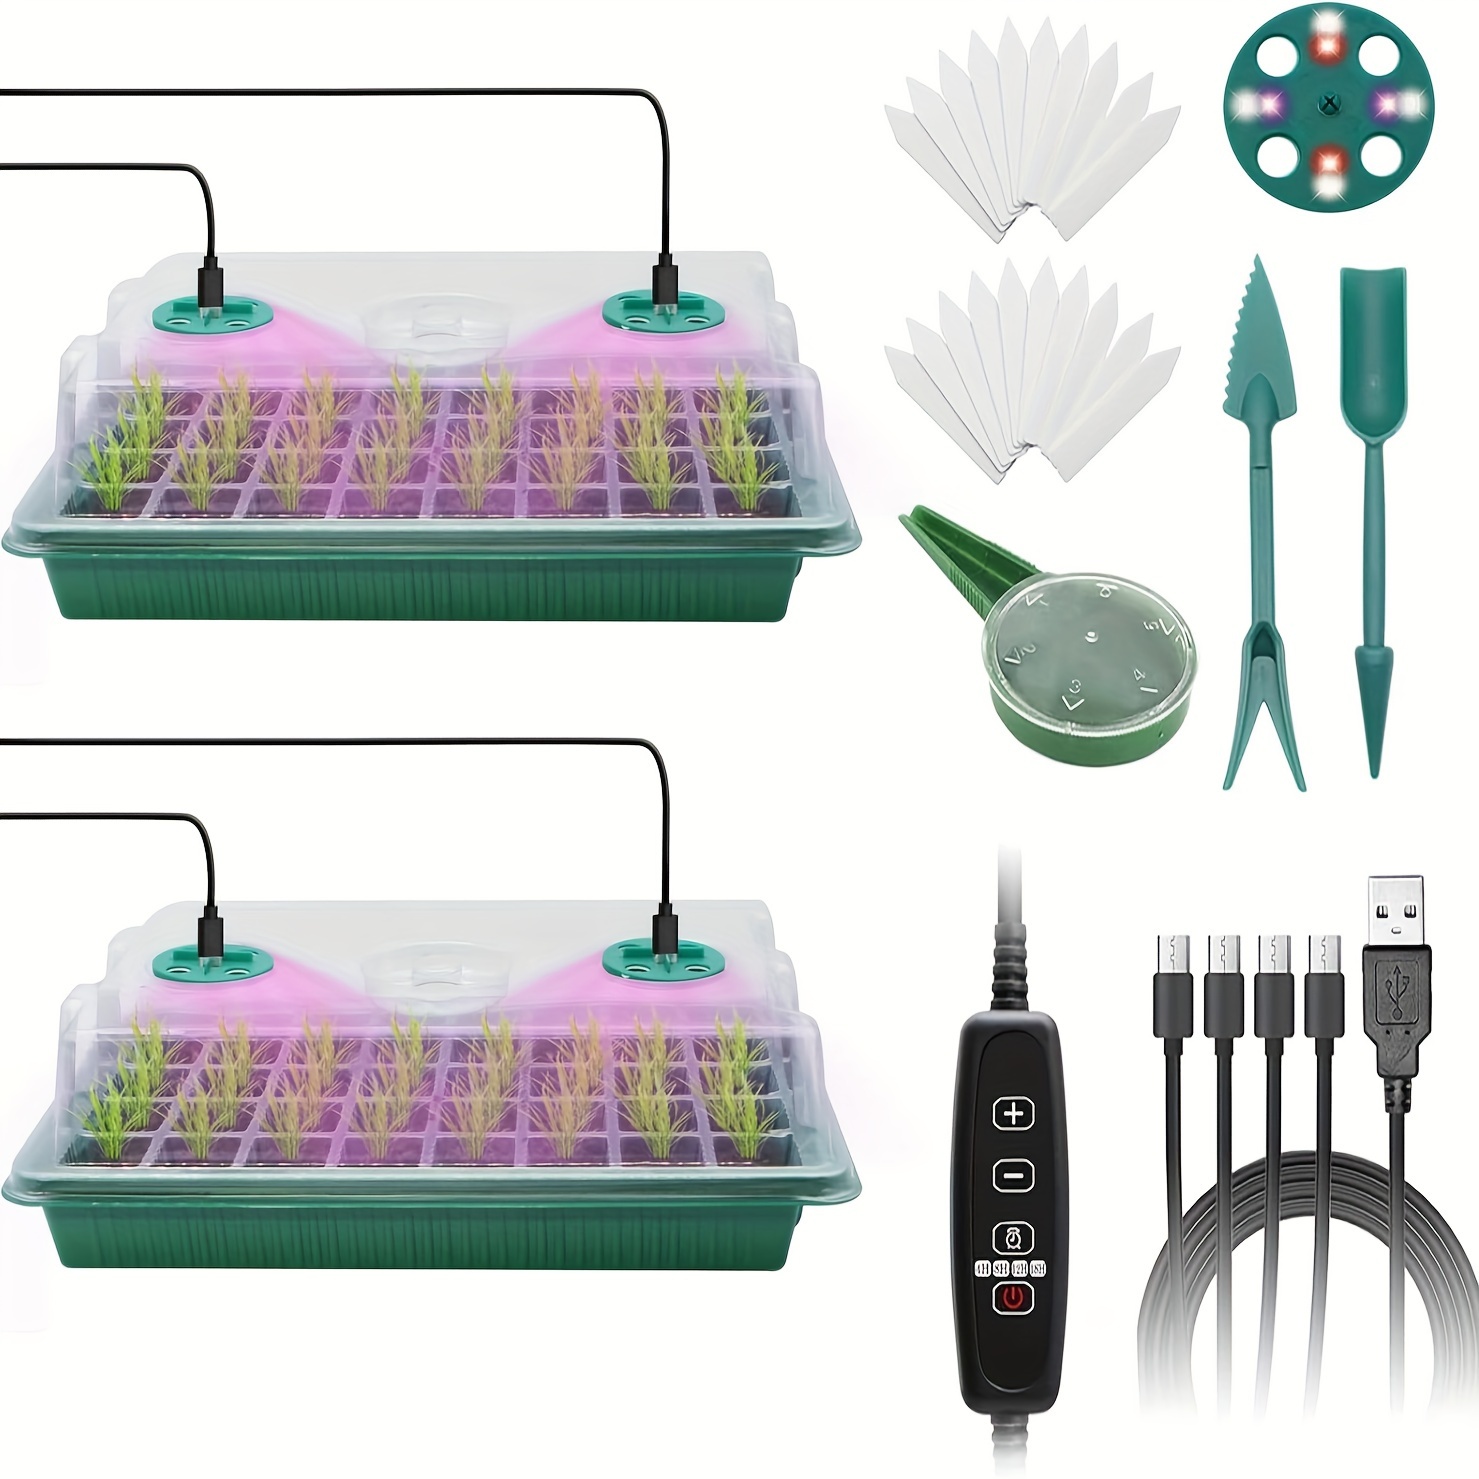 

Seed Starter Tray 2 Packs Seedling Starter Trays With Grow Light 4 Leds, Timer, Dimmable, Seed Starting Trays Kit With Humidity Dome (80 Cells) Indoor Gardening Plant Germination Trays (green)